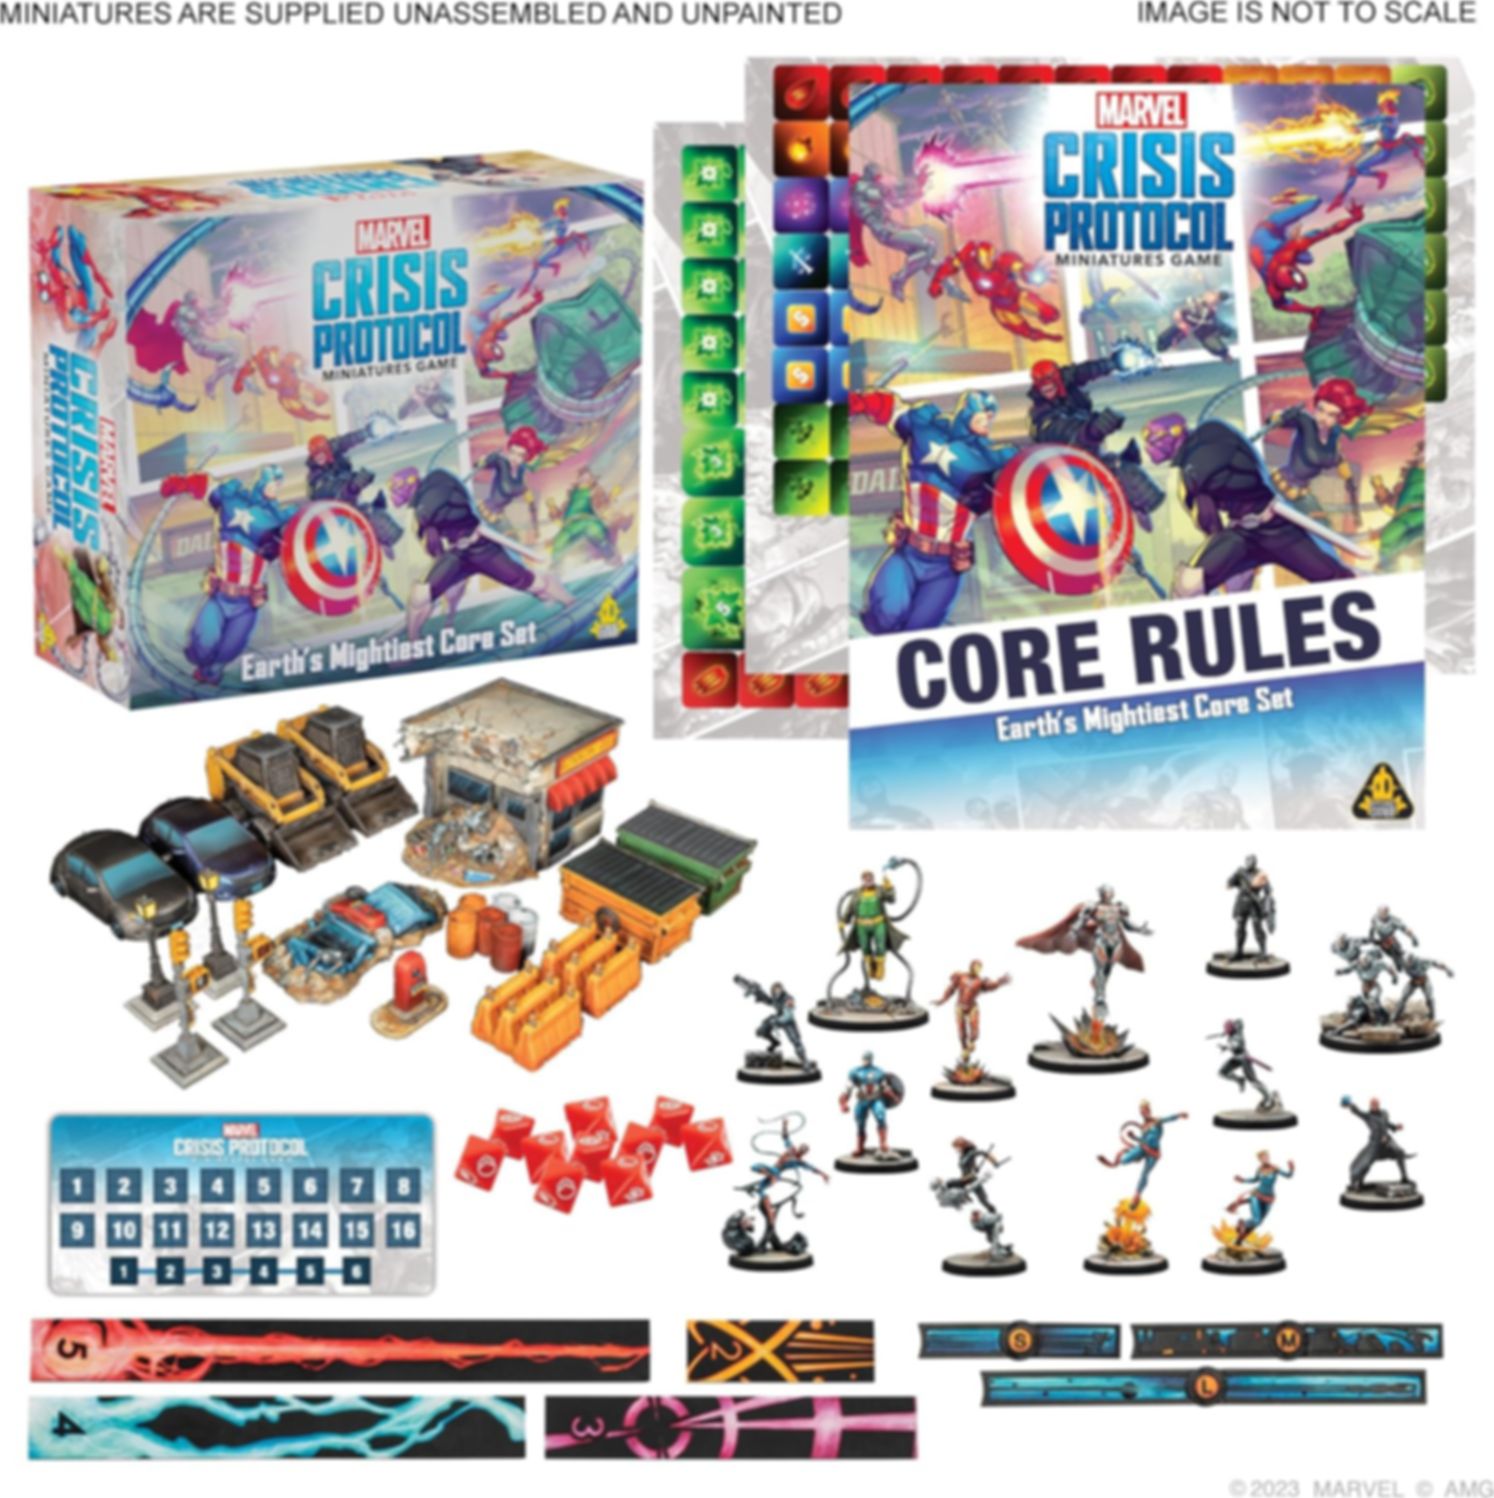 Marvel: Crisis Protocol – Earth's Mightiest Core Set components